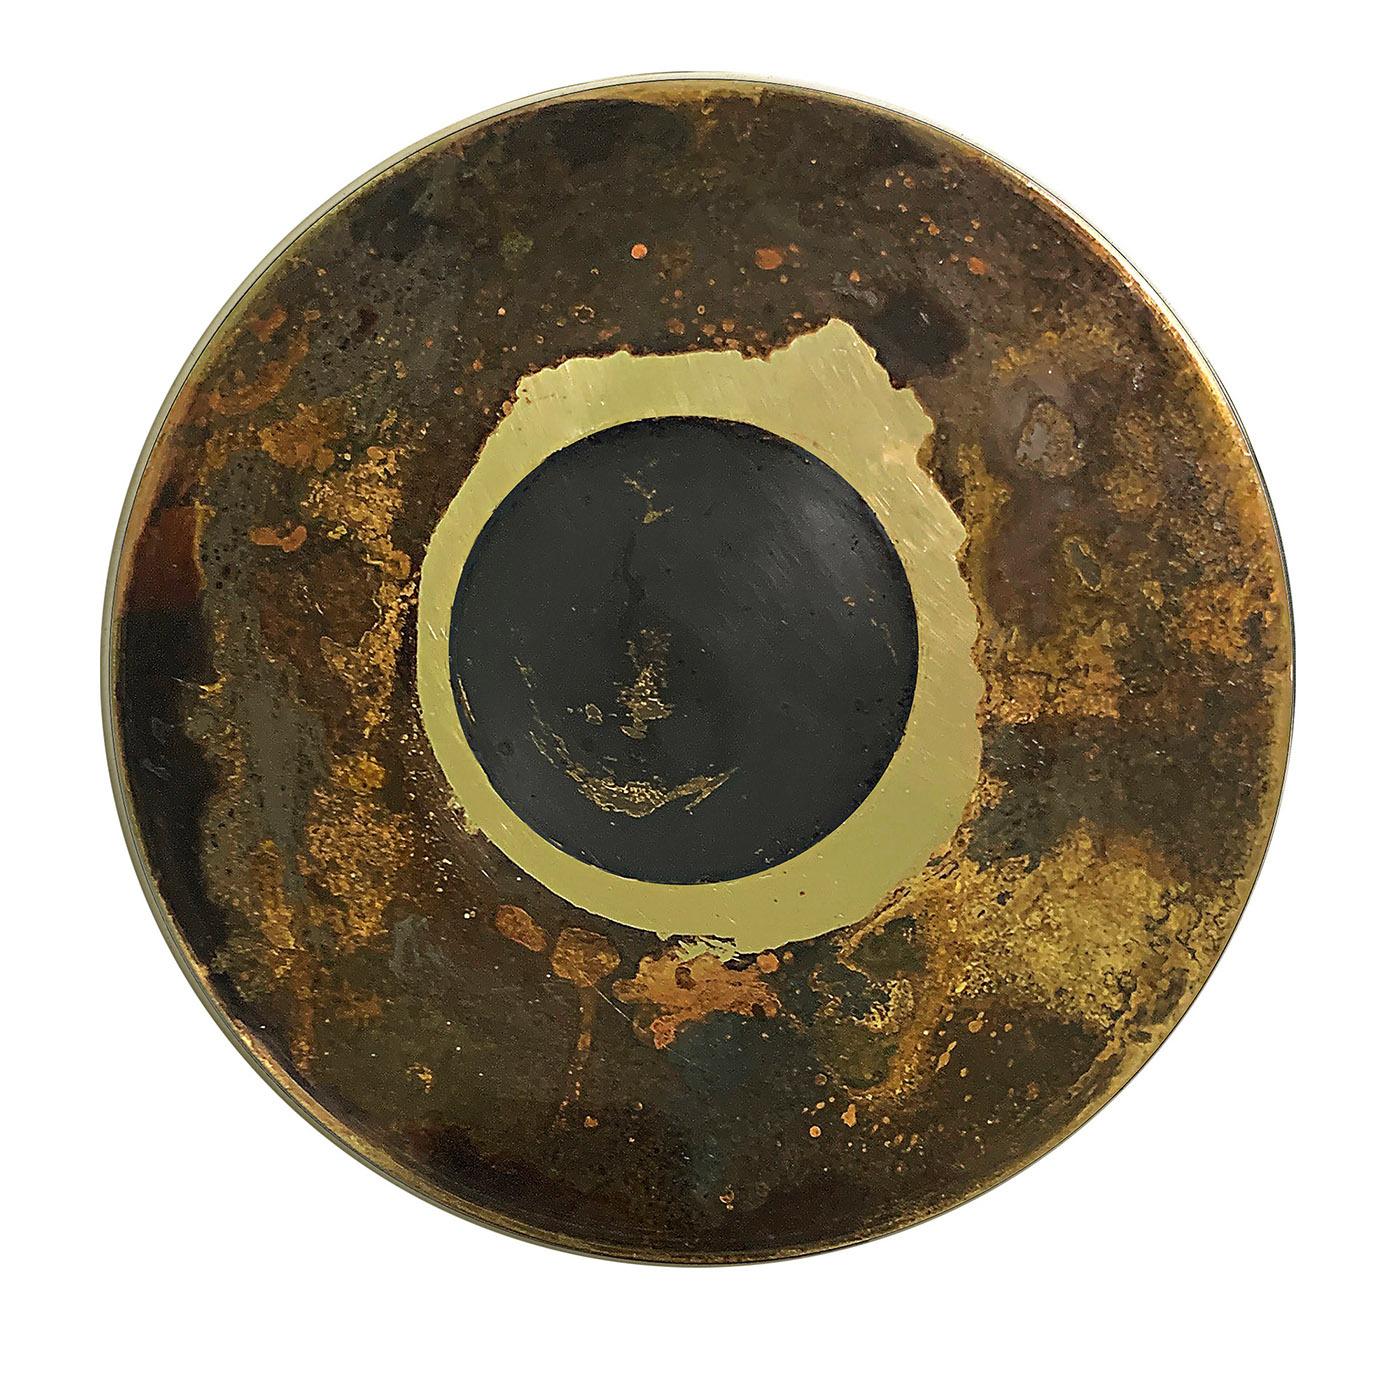 This splendid decorative disk evokes the mystery of a black hole surrounded by a golden galaxy. Its characteristic, unrepeatable aesthetic combines an intriguing corroded texture with a triumph of traceries naturally obtained with acids and oxides